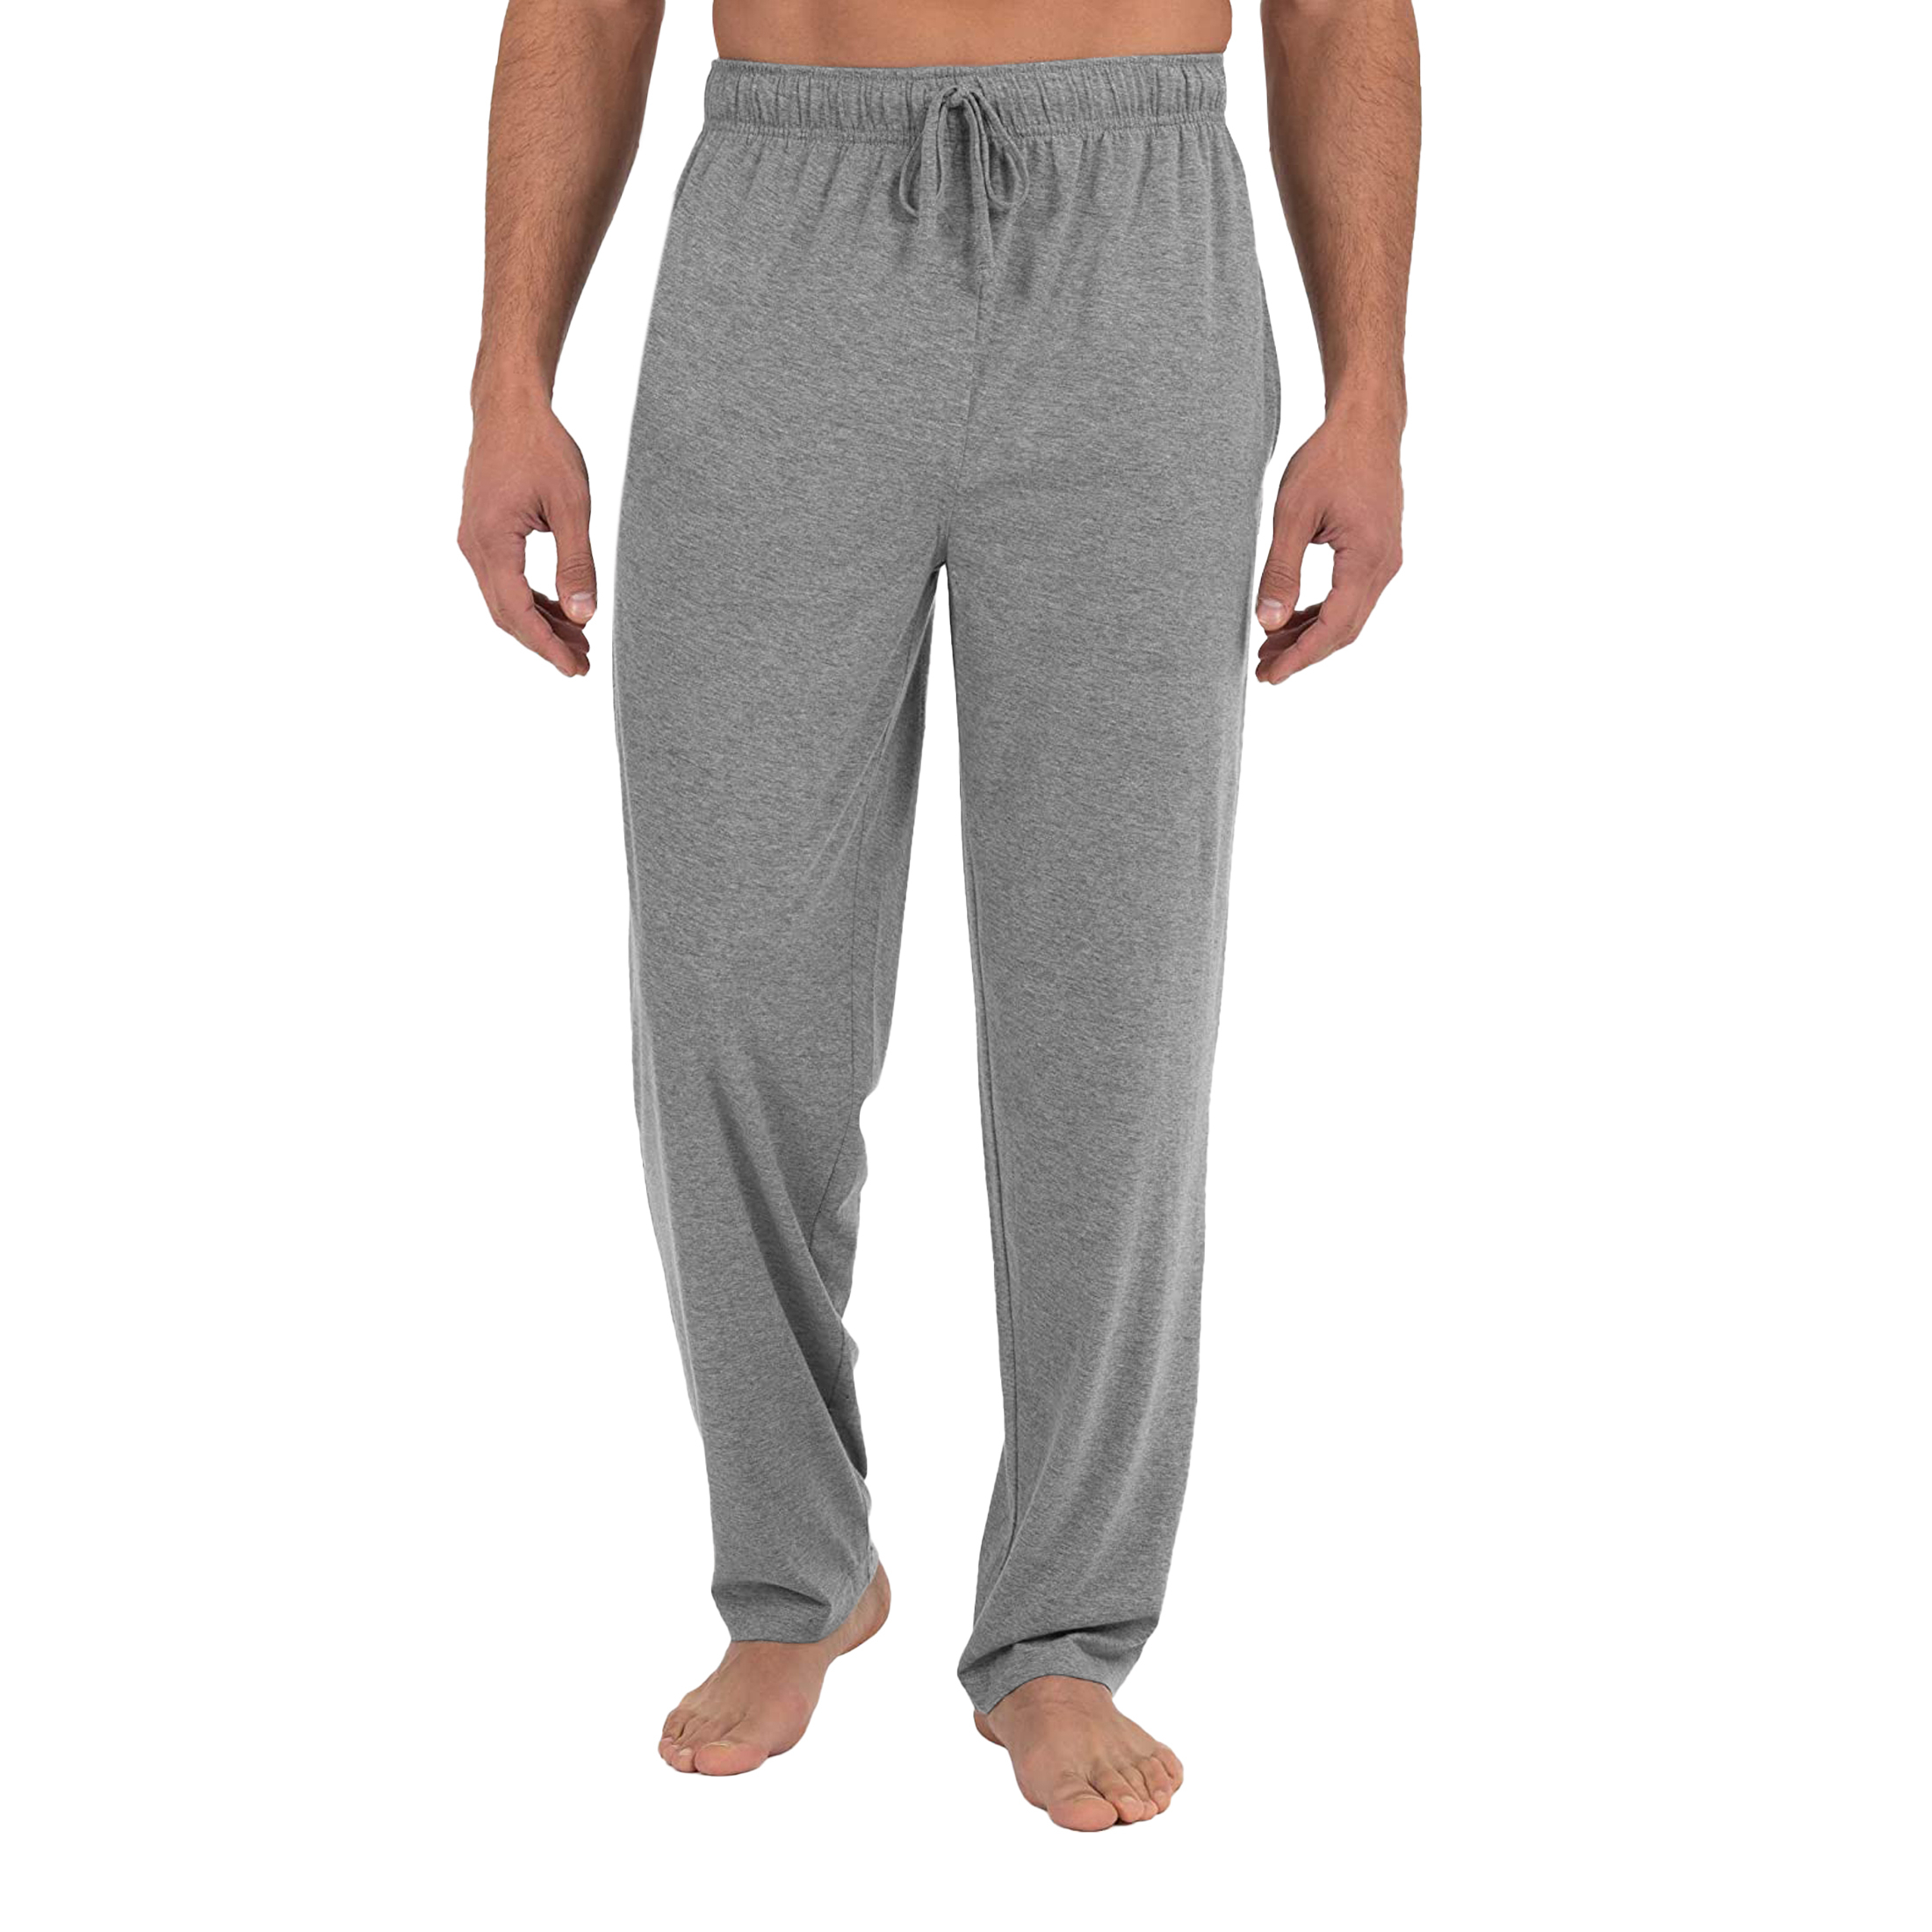 Men's Soft Jersey Knit Long Lounge Sleep Pants With Pockets - Plaid, Large